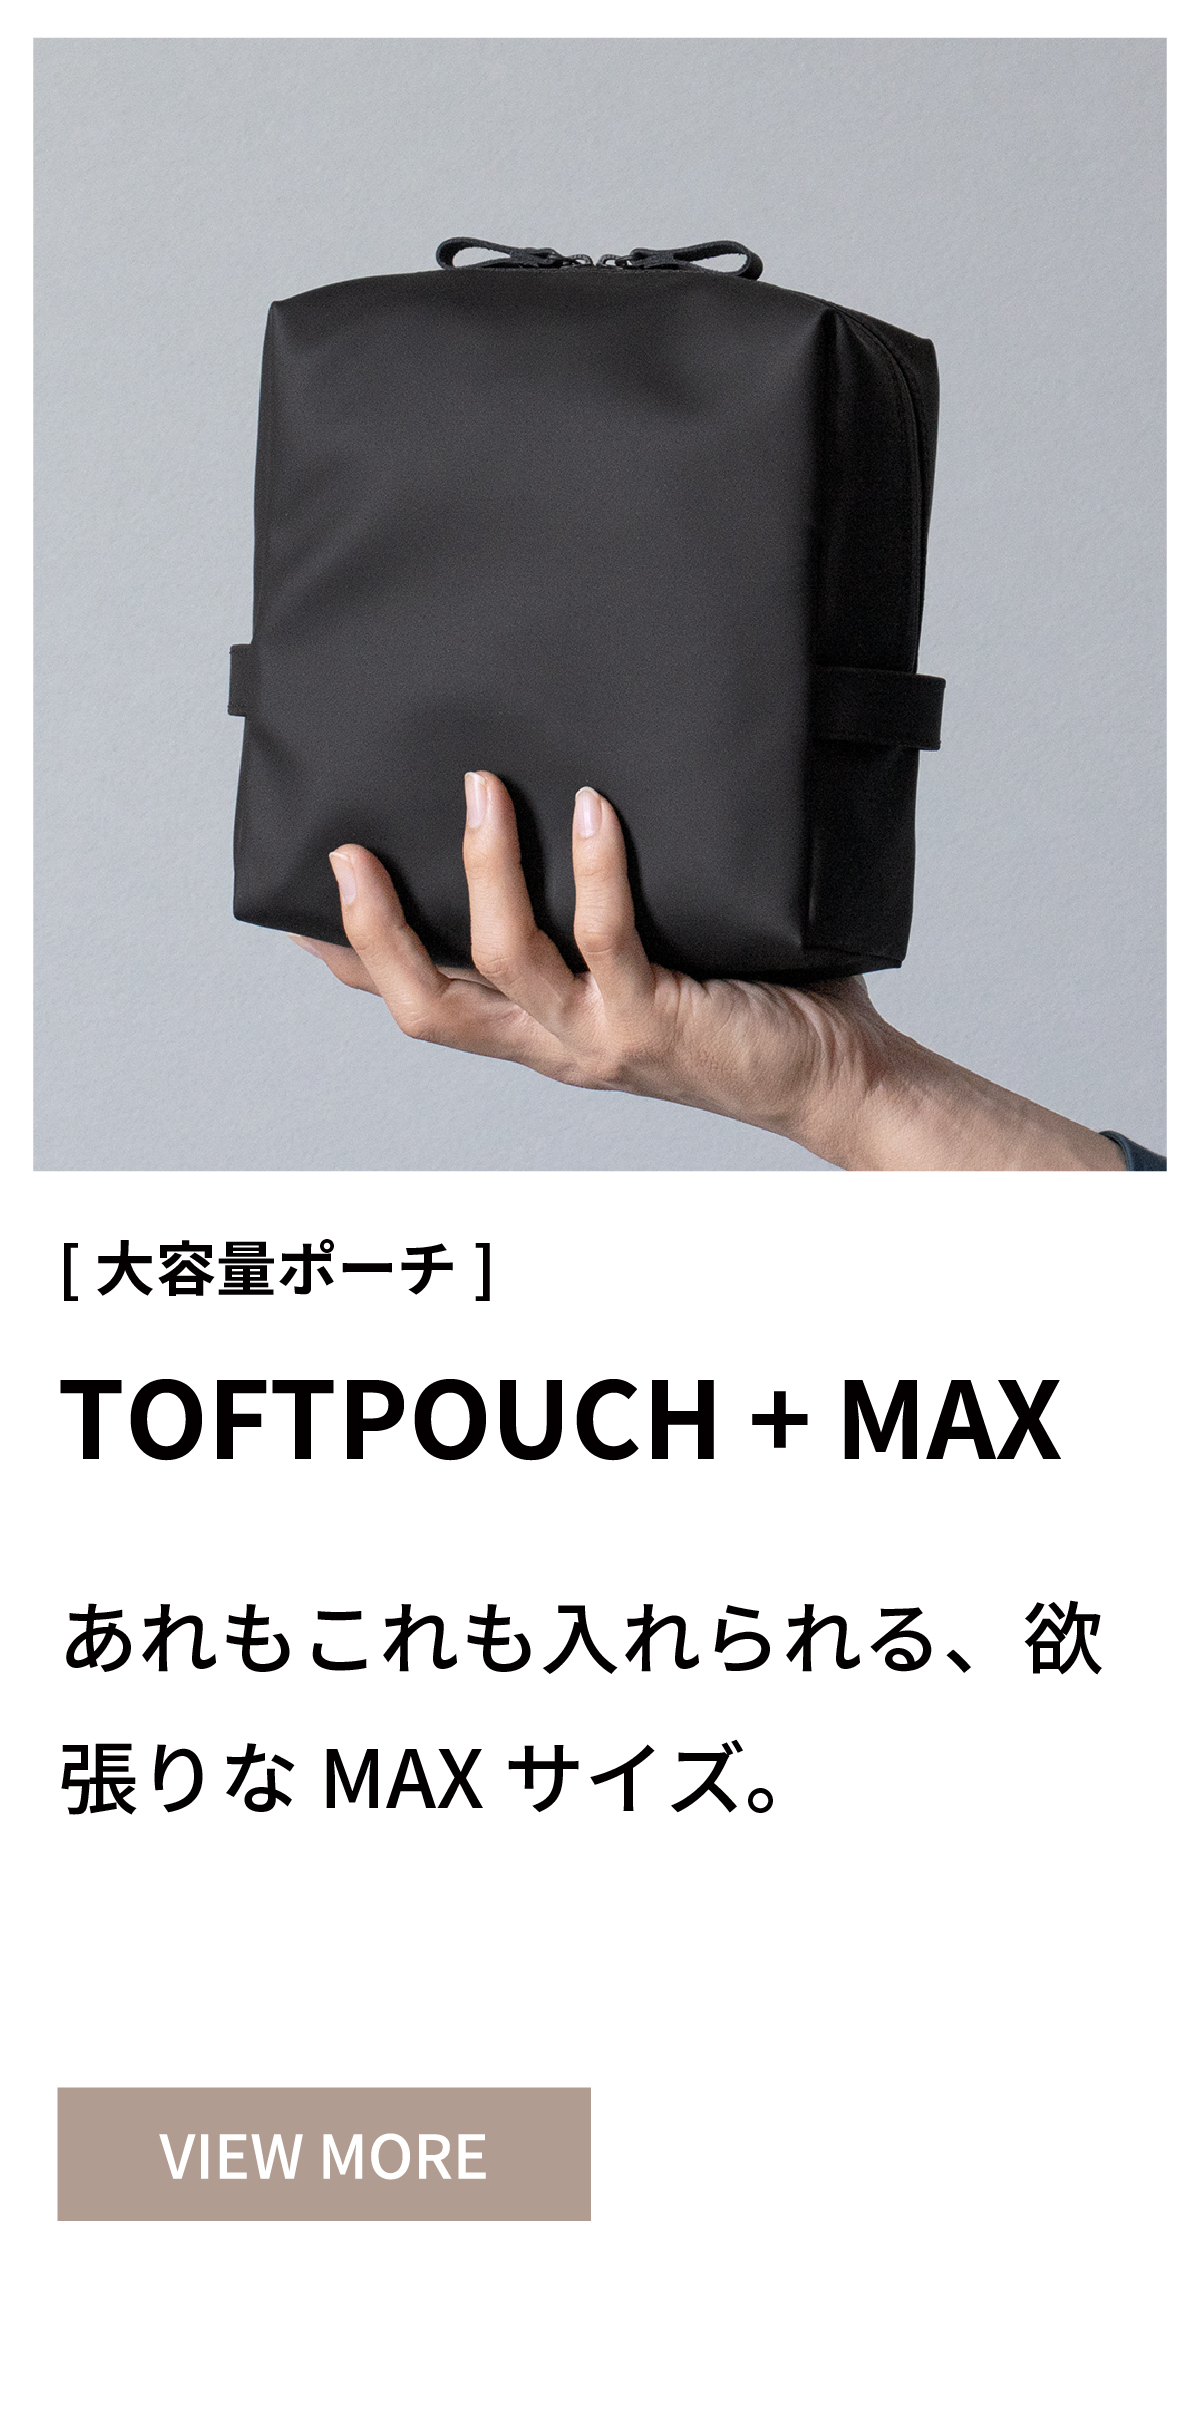 TOFTPOUCH+MAX